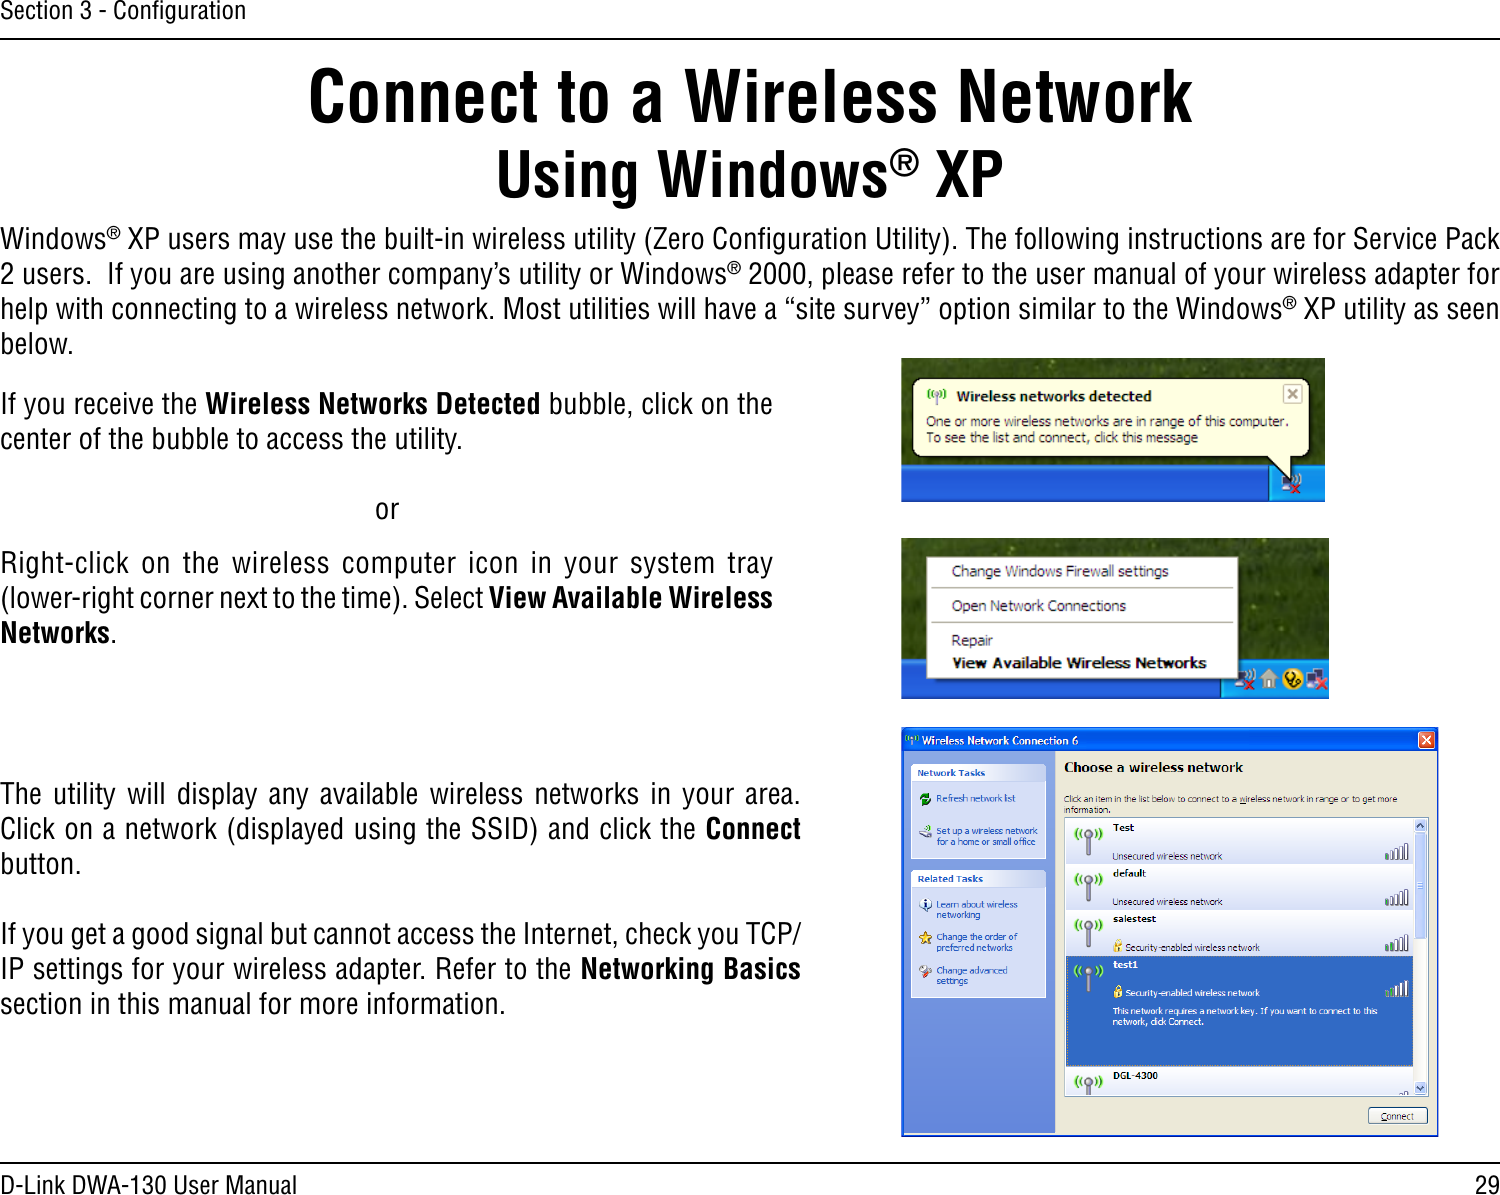 29D-Link DWA-130 User ManualSection 3 - ConﬁgurationConnect to a Wireless NetworkUsing Windows® XPWindows® XP users may use the built-in wireless utility (Zero Conﬁguration Utility). The following instructions are for Service Pack 2 users.  If you are using another company’s utility or Windows® 2000, please refer to the user manual of your wireless adapter for help with connecting to a wireless network. Most utilities will have a “site survey” option similar to the Windows® XP utility as seen below.Right-click  on  the  wireless  computer  icon  in  your  system  tray (lower-right corner next to the time). Select View Available Wireless Networks.If you receive the Wireless Networks Detected bubble, click on the center of the bubble to access the utility.     orThe  utility  will  display  any  available  wireless  networks  in  your  area. Click on a network (displayed using the SSID) and click the Connect button.If you get a good signal but cannot access the Internet, check you TCP/IP settings for your wireless adapter. Refer to the Networking Basics section in this manual for more information.